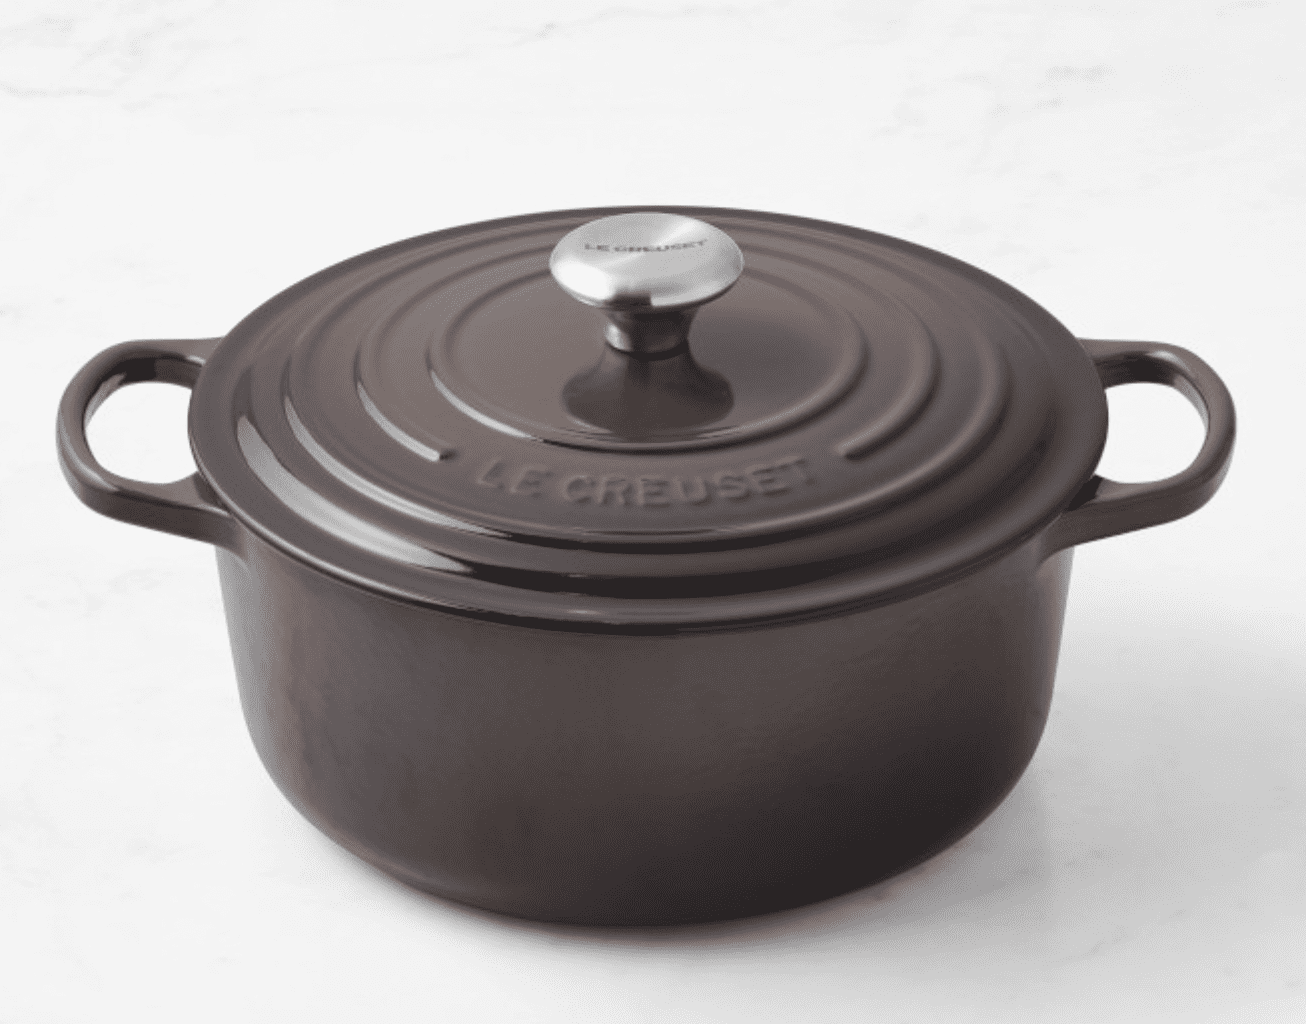 http://cdn.apartmenttherapy.info/image/upload/v1675274728/commerce/LC-Signature-Round-Dutch-Oven.png